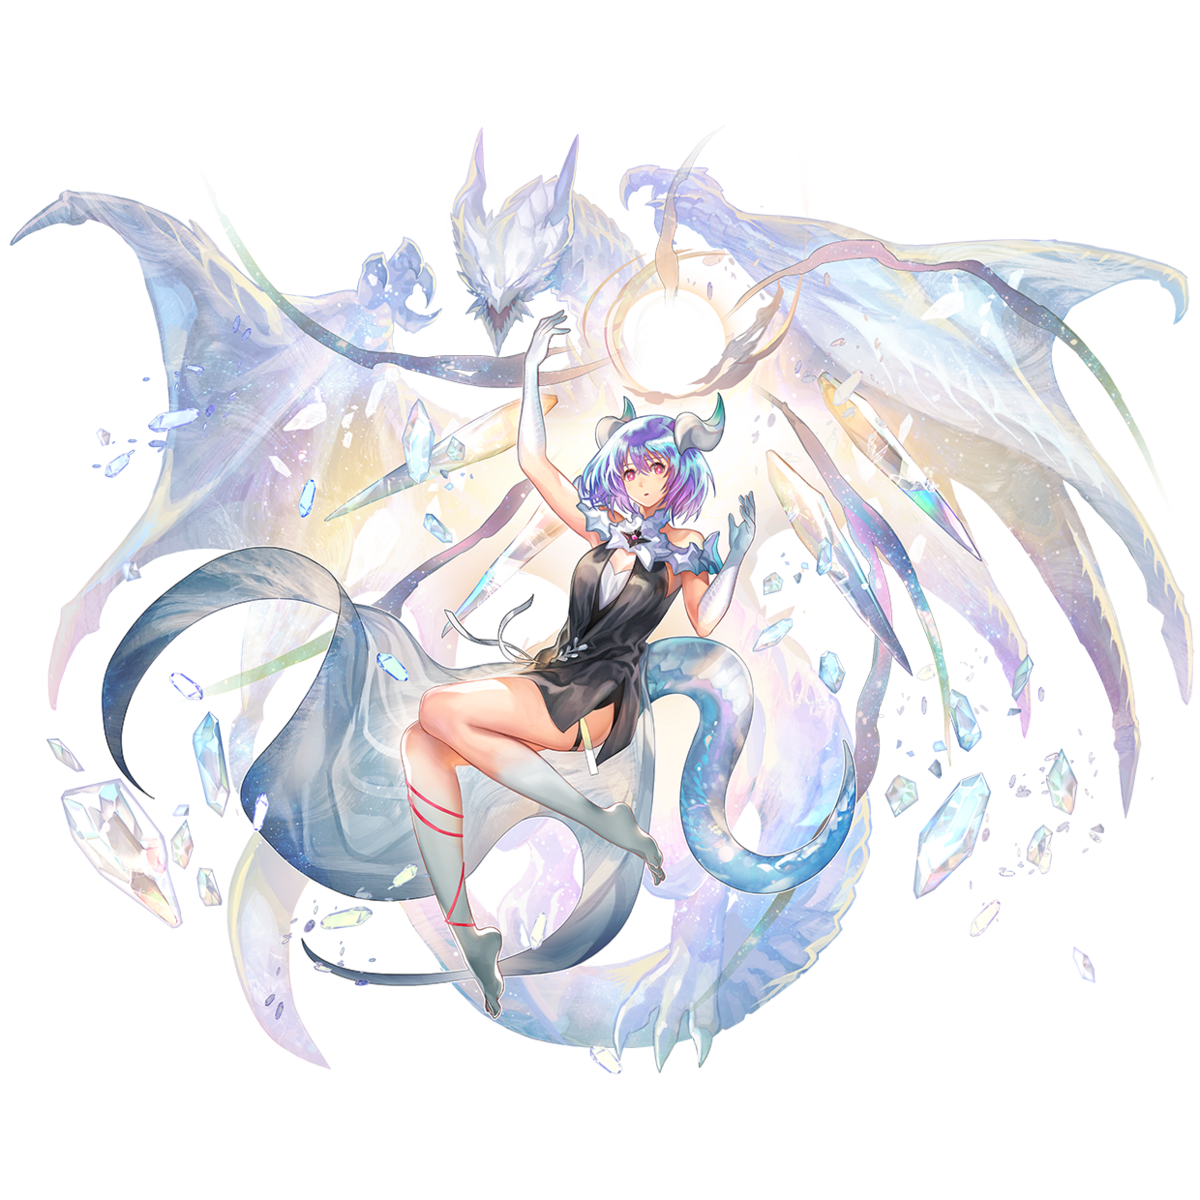 Starky/Gallery - Another Eden Wiki